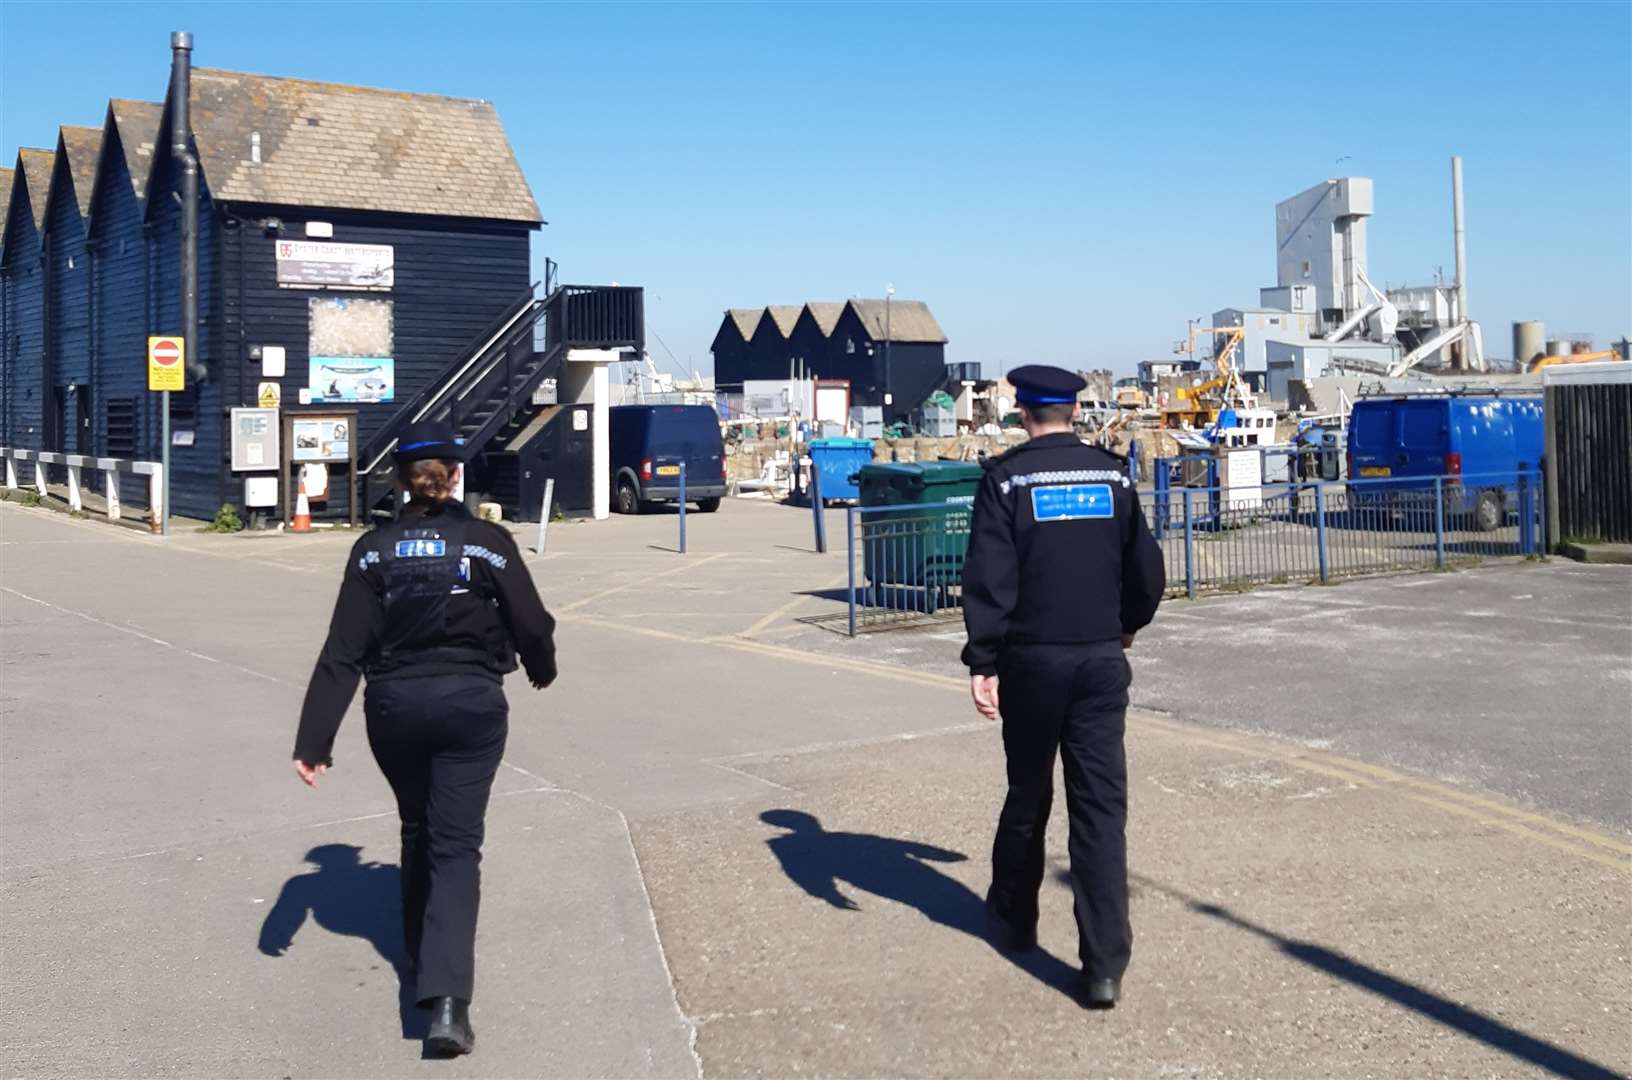 Police out on patrol in Whitstable during lockdown